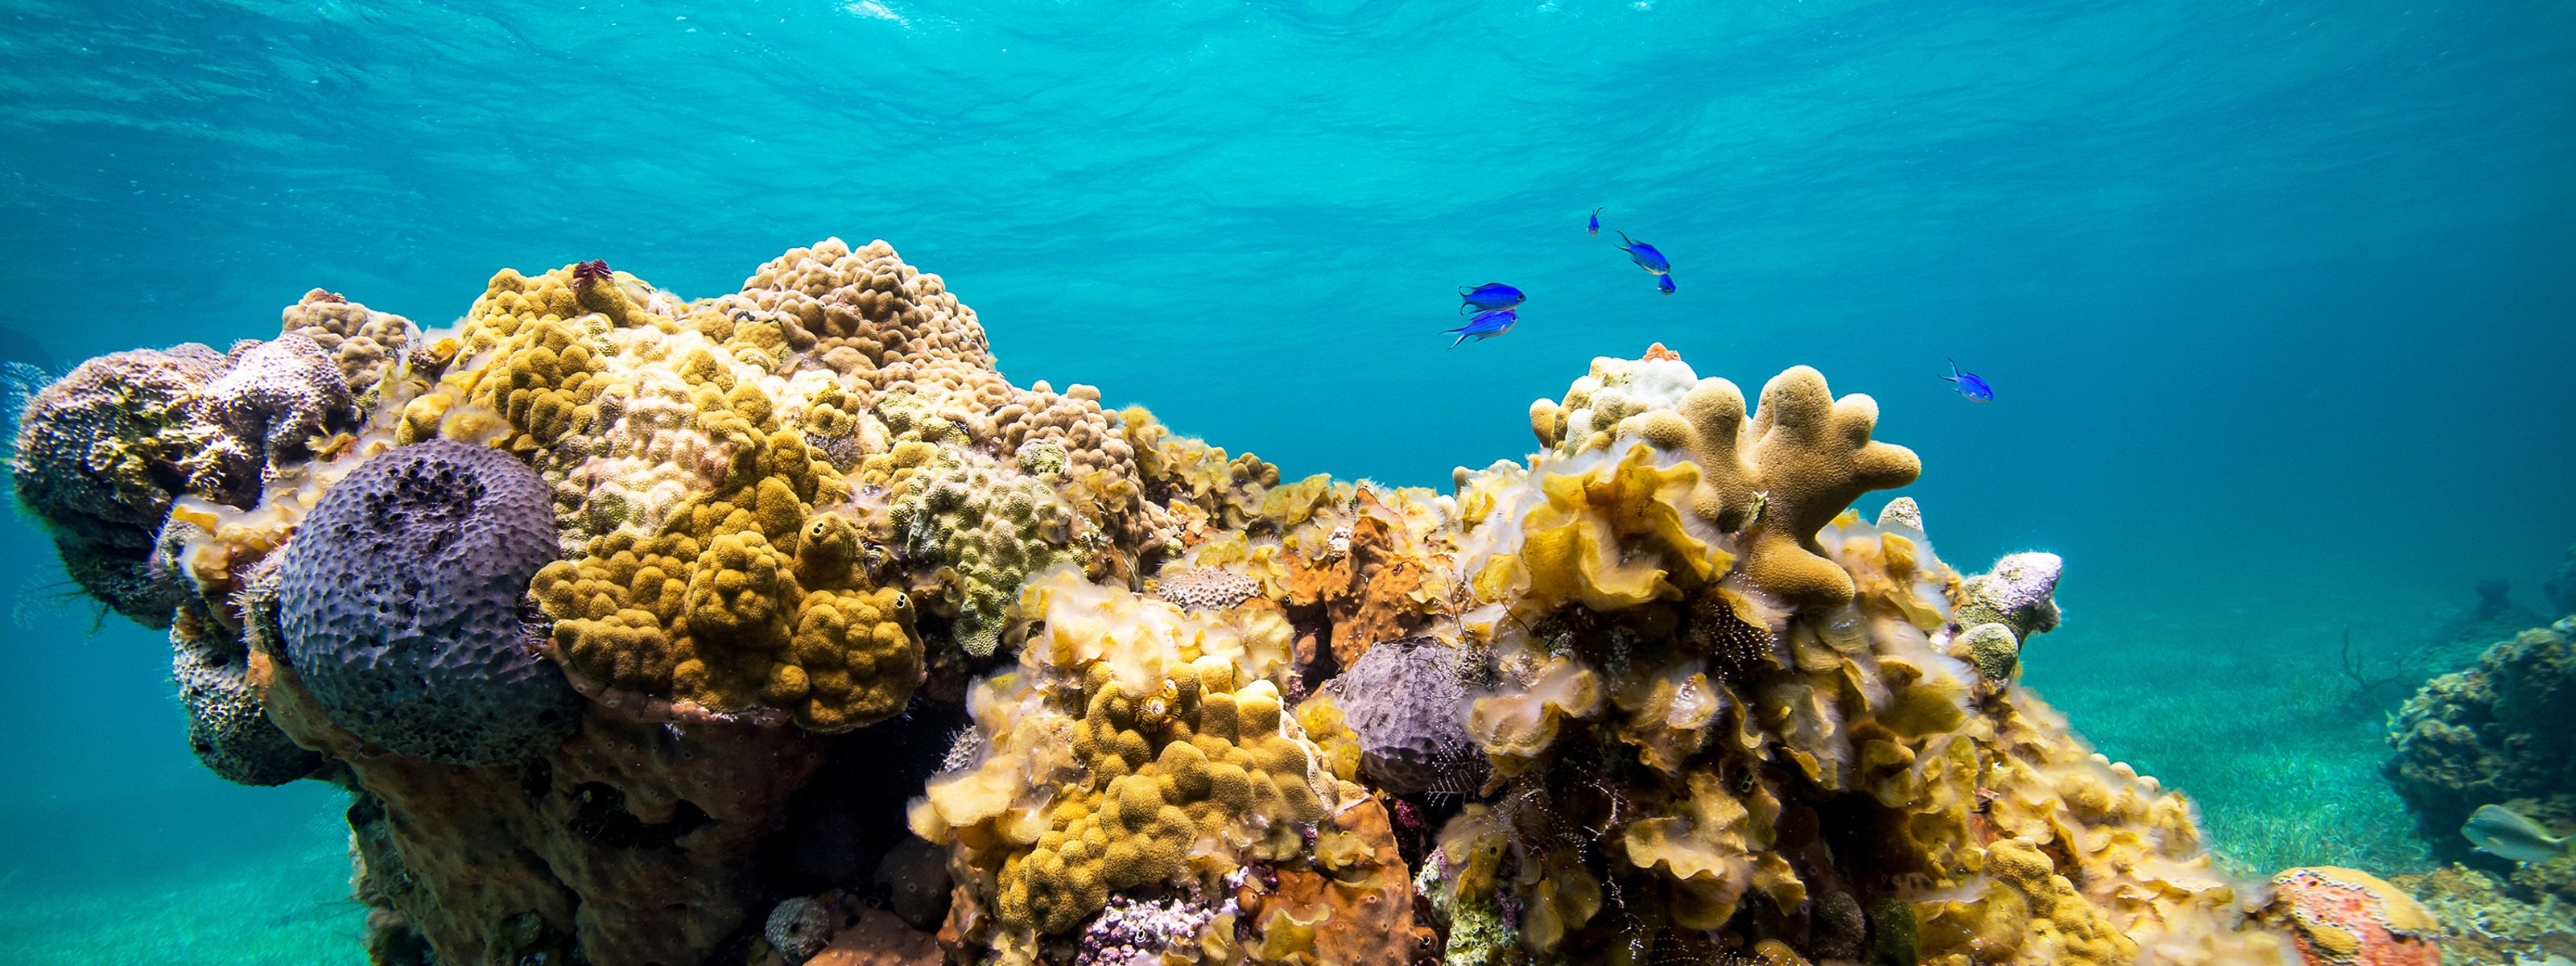 Healthy coral reefs in the Caribbean water